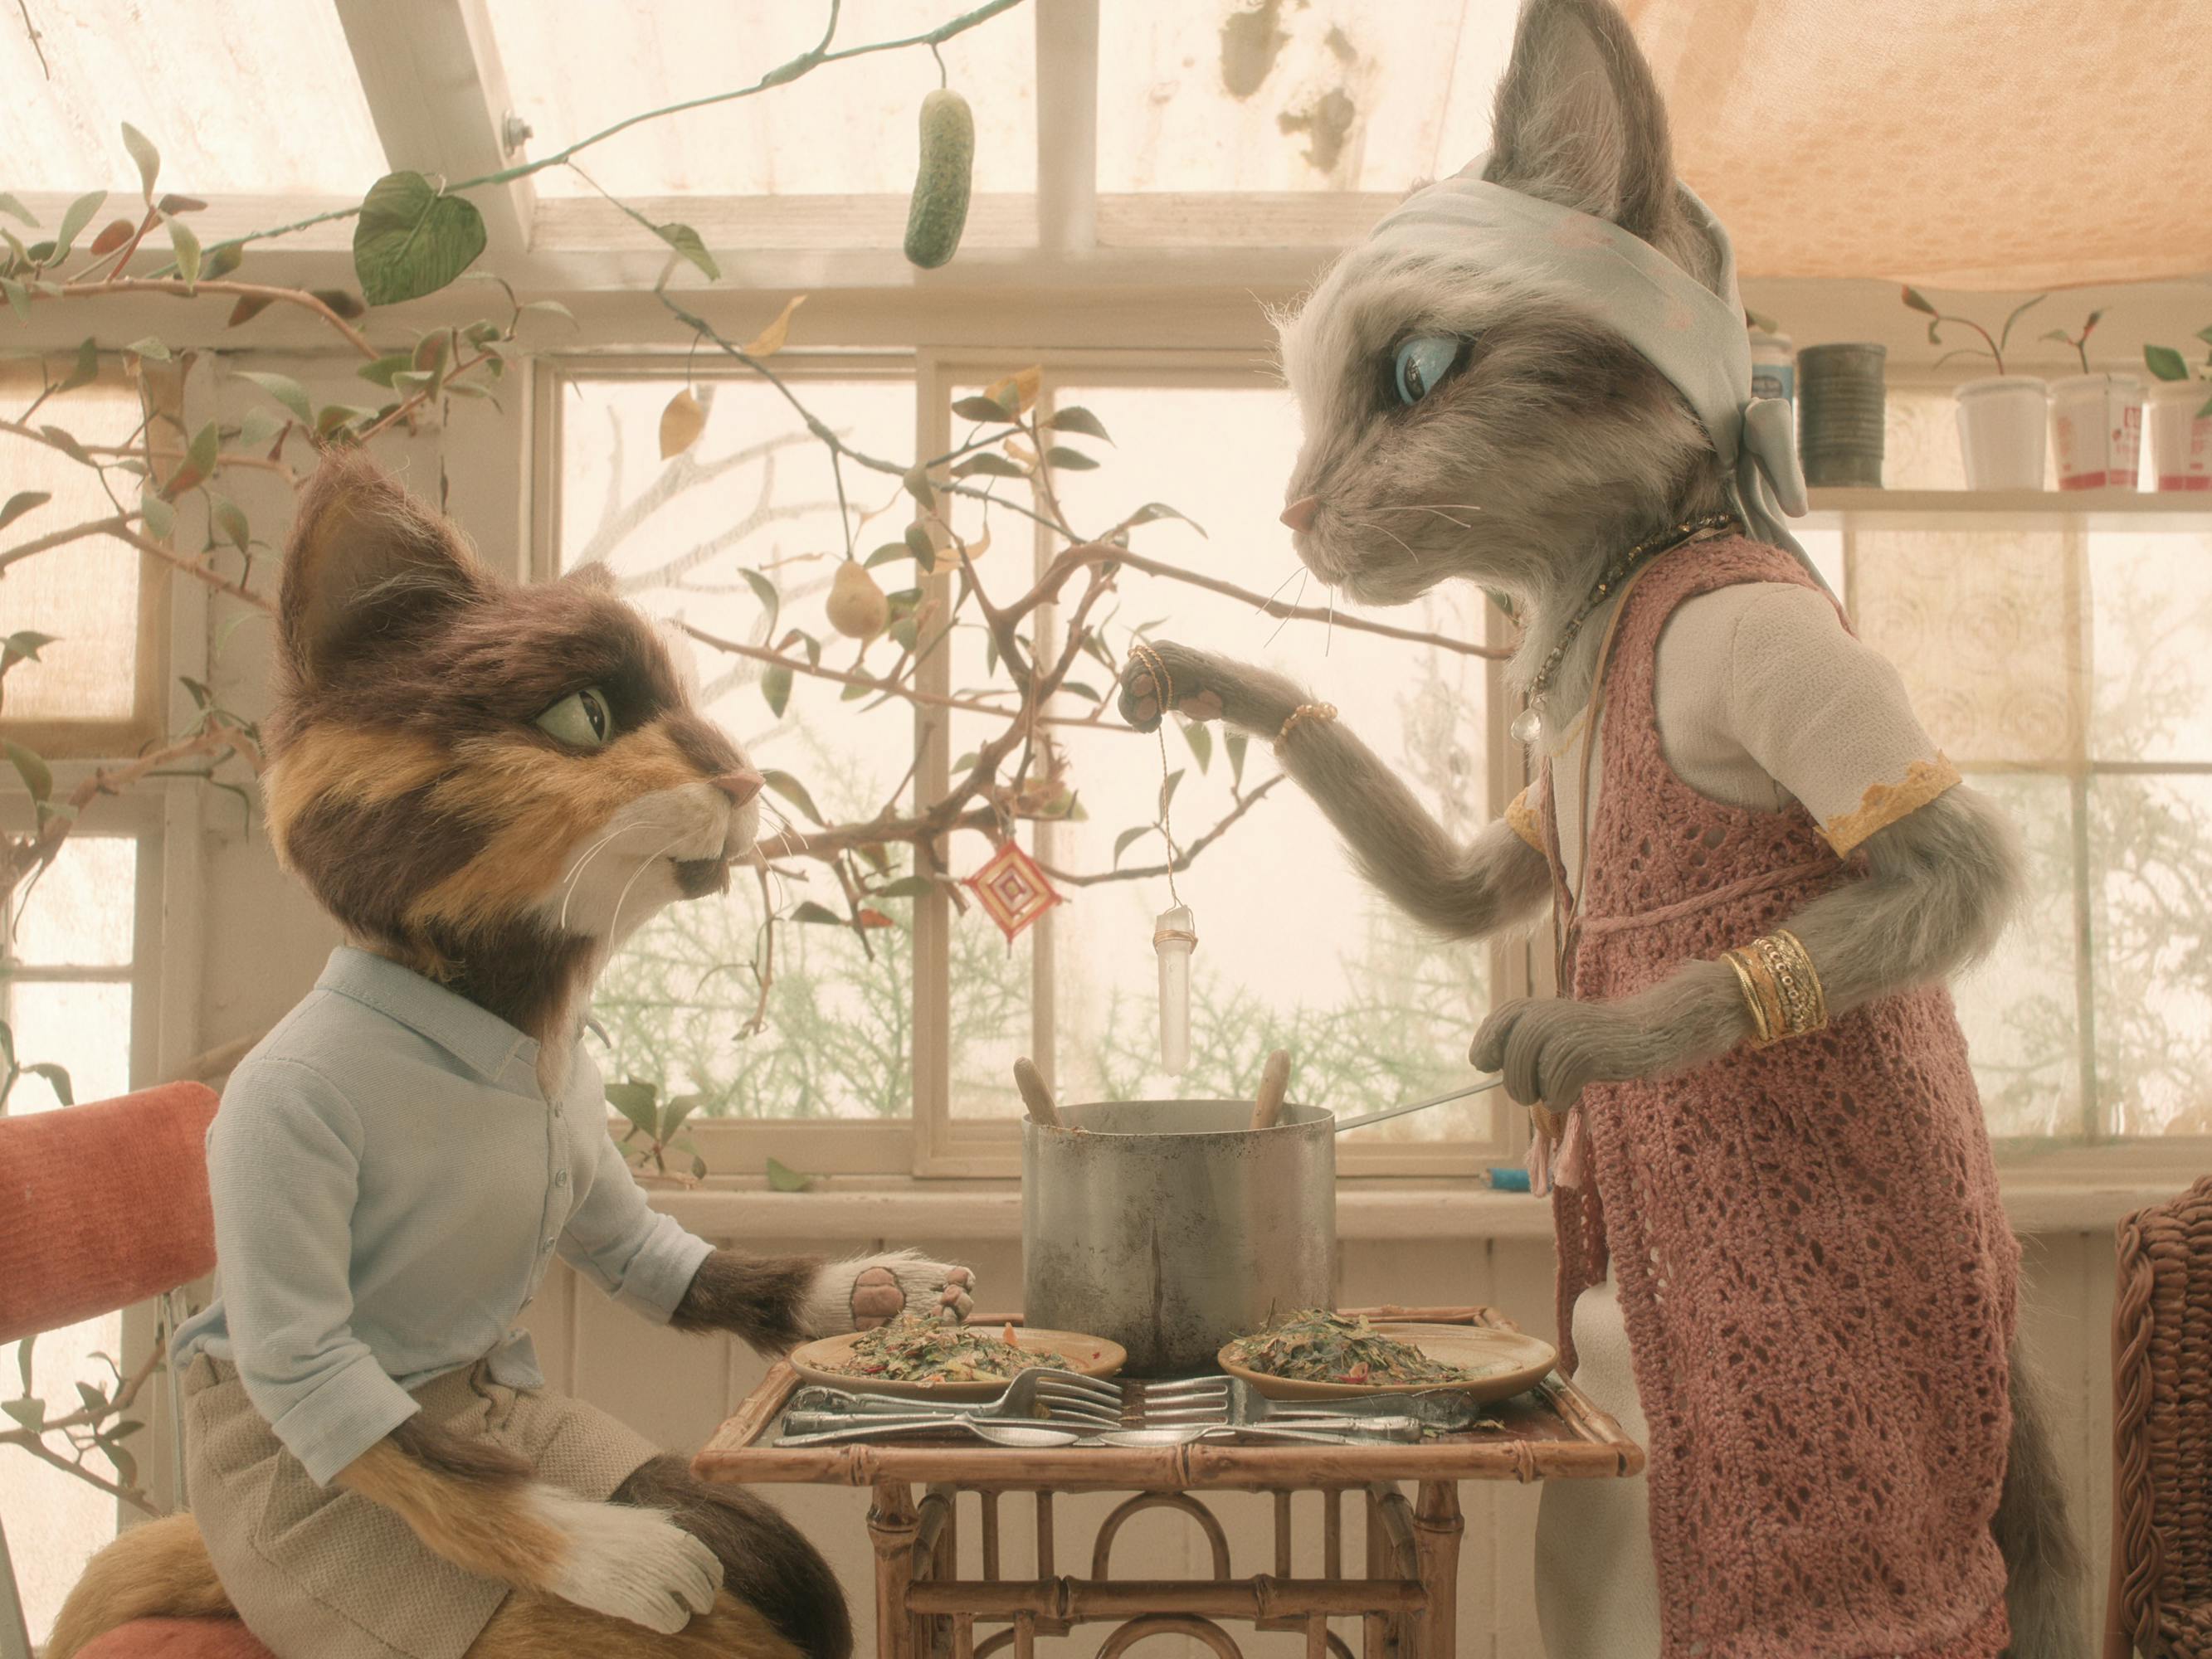 To furry creatures talk together over a pot of soup. One wears a blue shirt and khakis and the other wears a red dress and white headband.